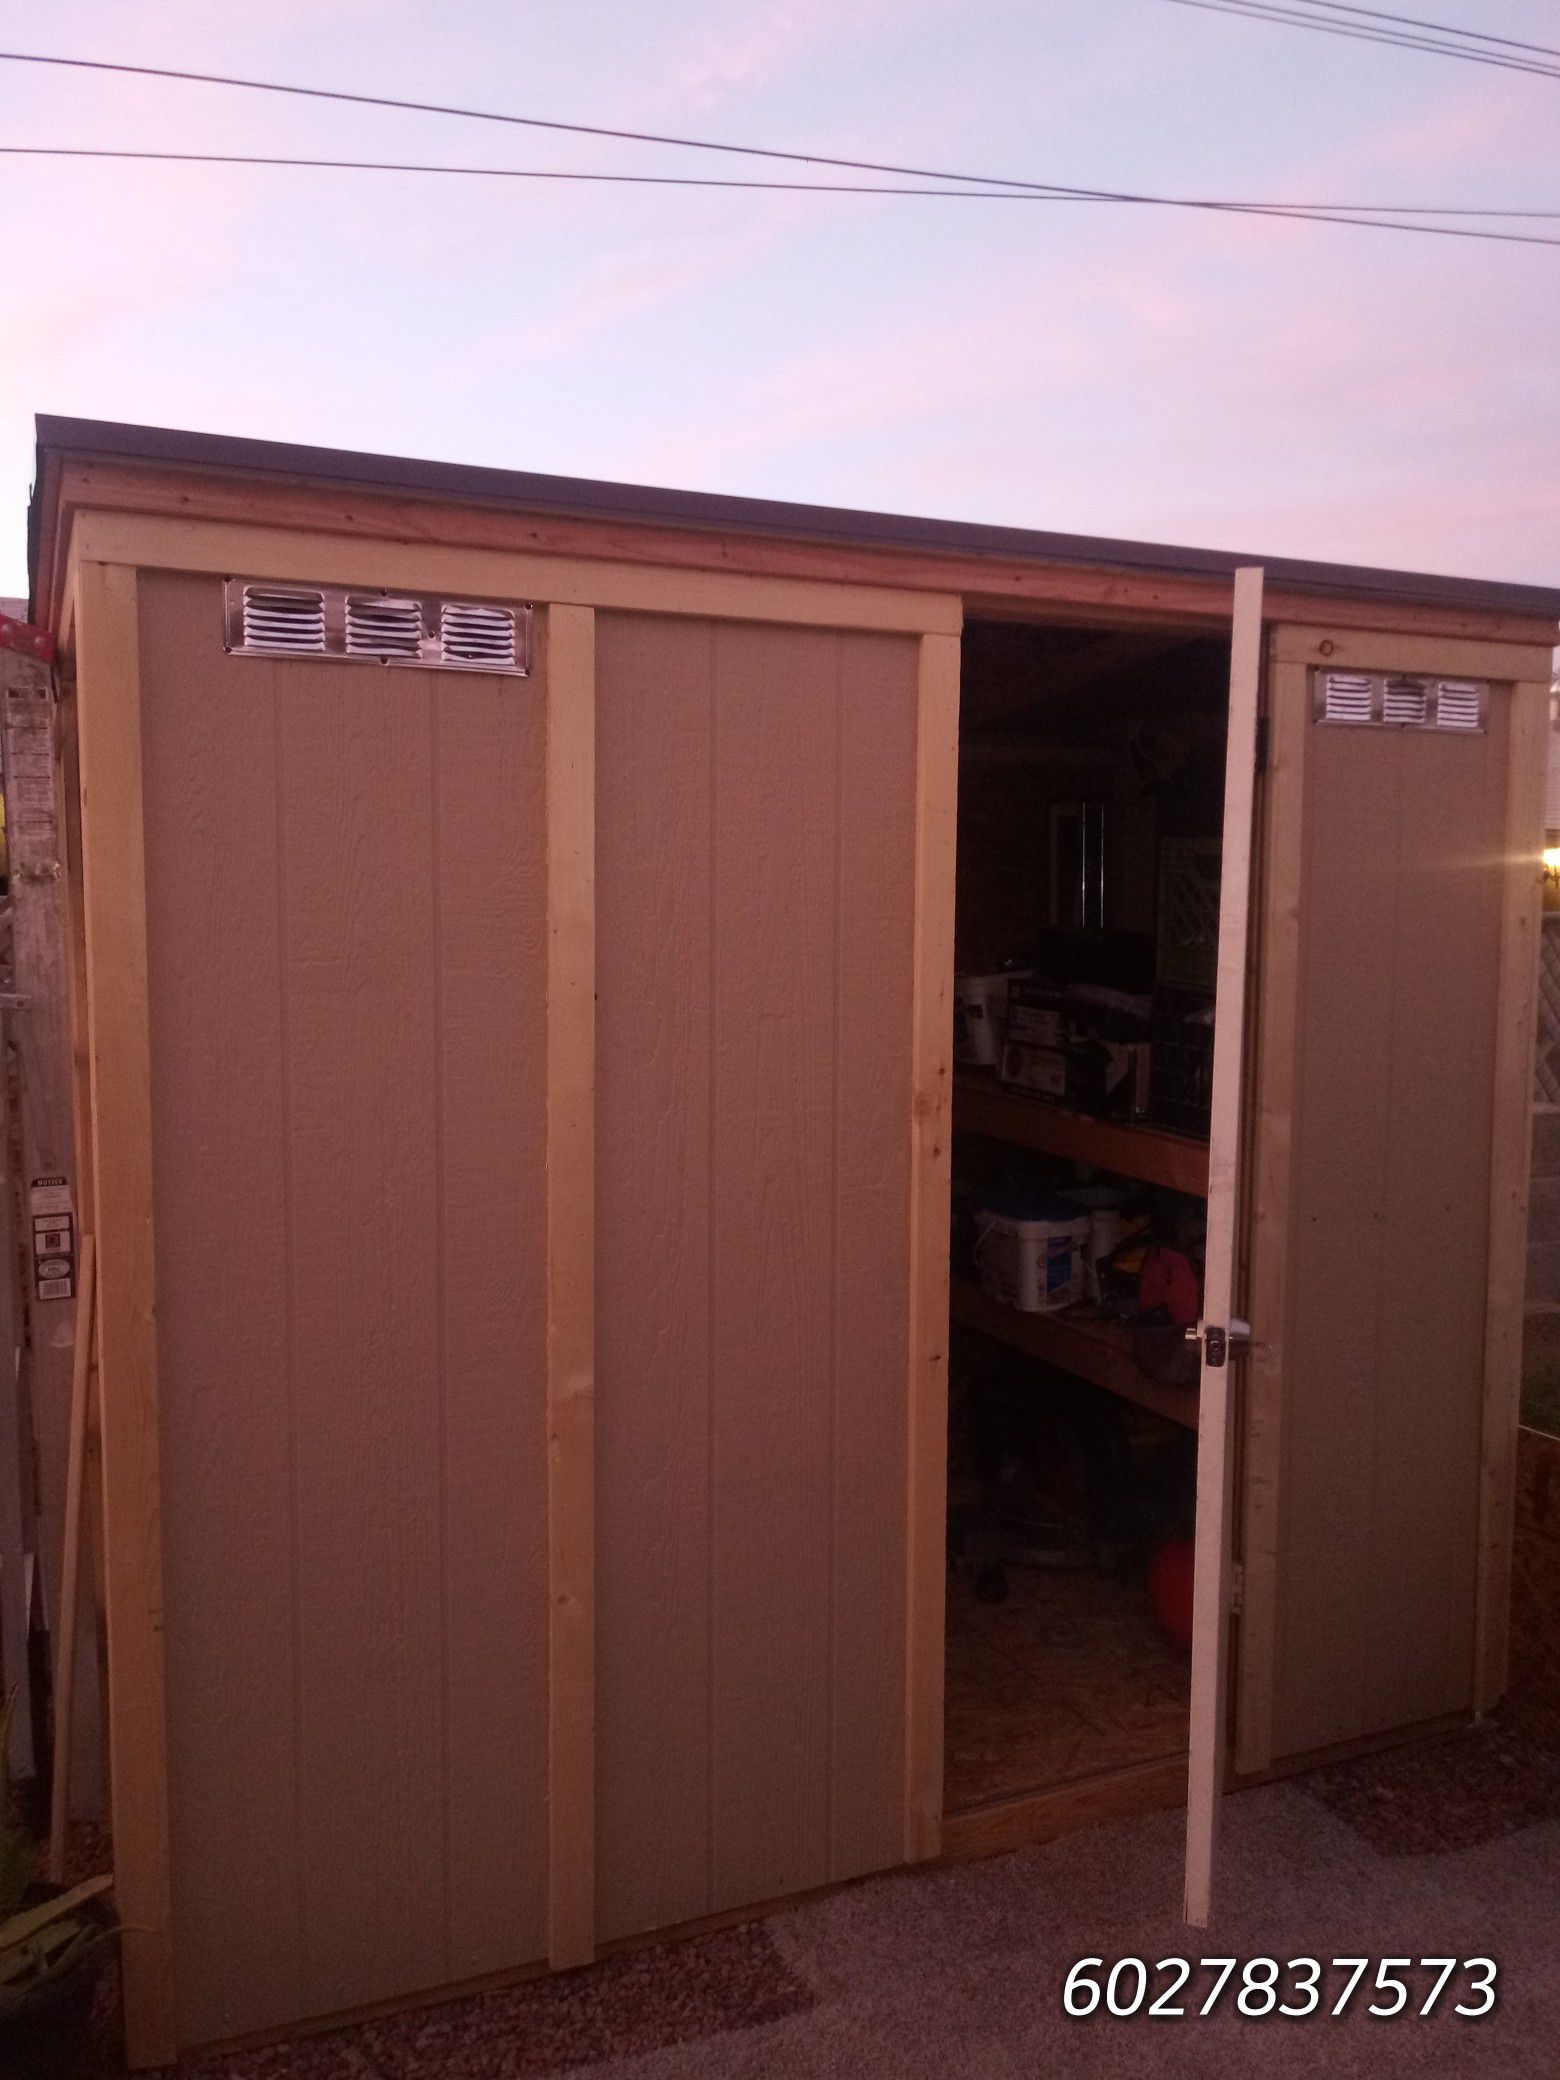 Shed storage 4x8ft by 7ft tall